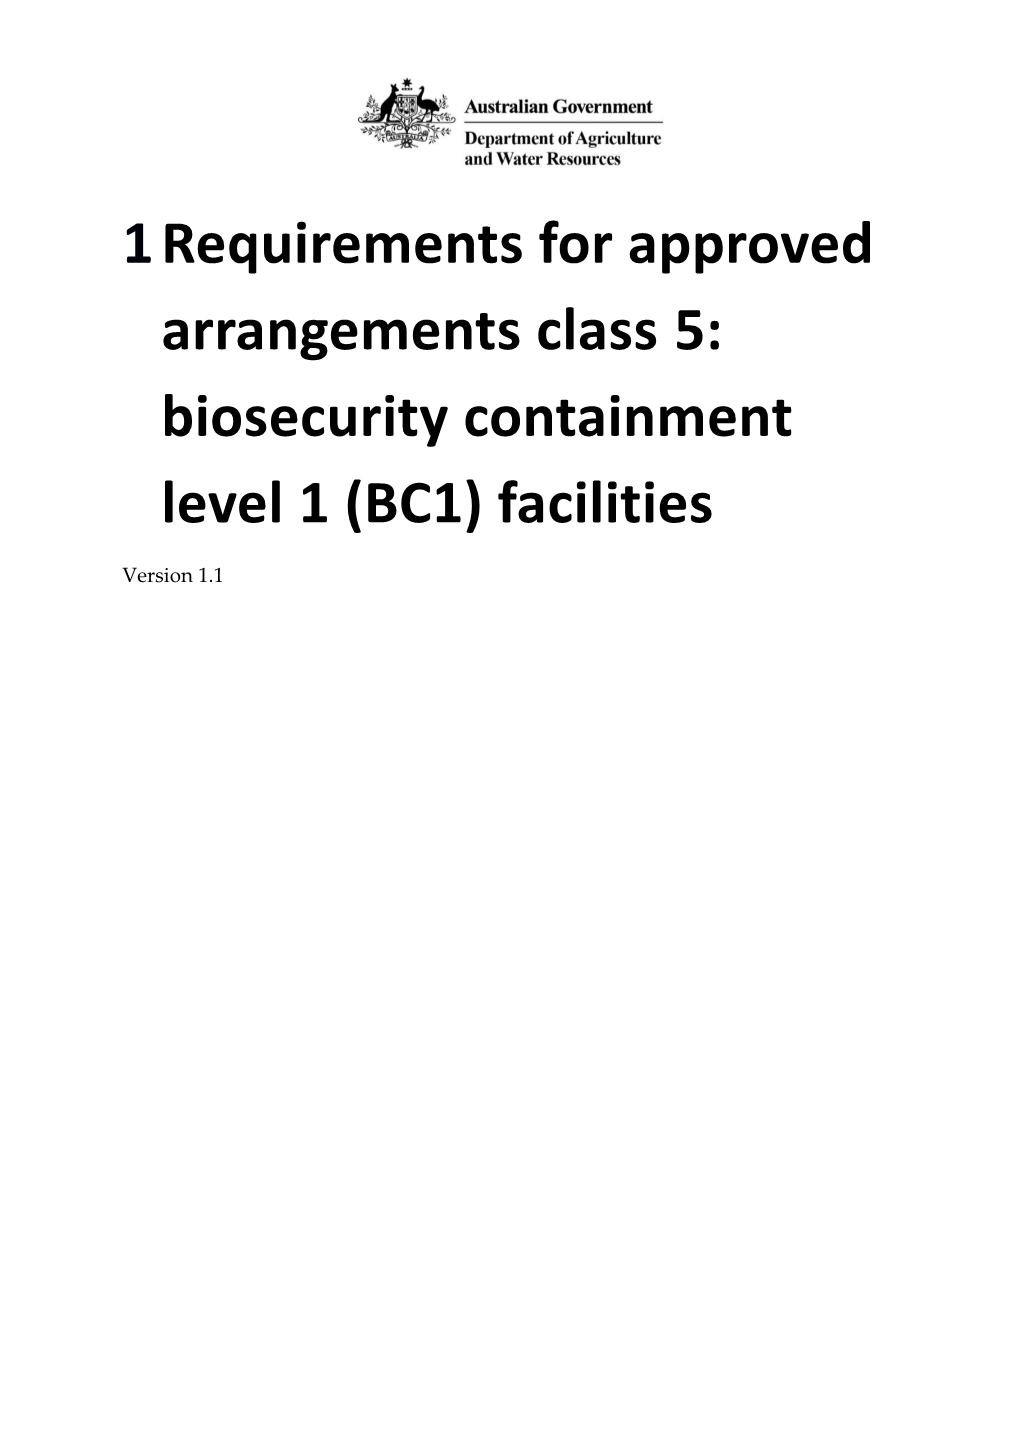 Approved Arrangement for Biosecurity Containment Level 2 (BC2) Facilities Requirements